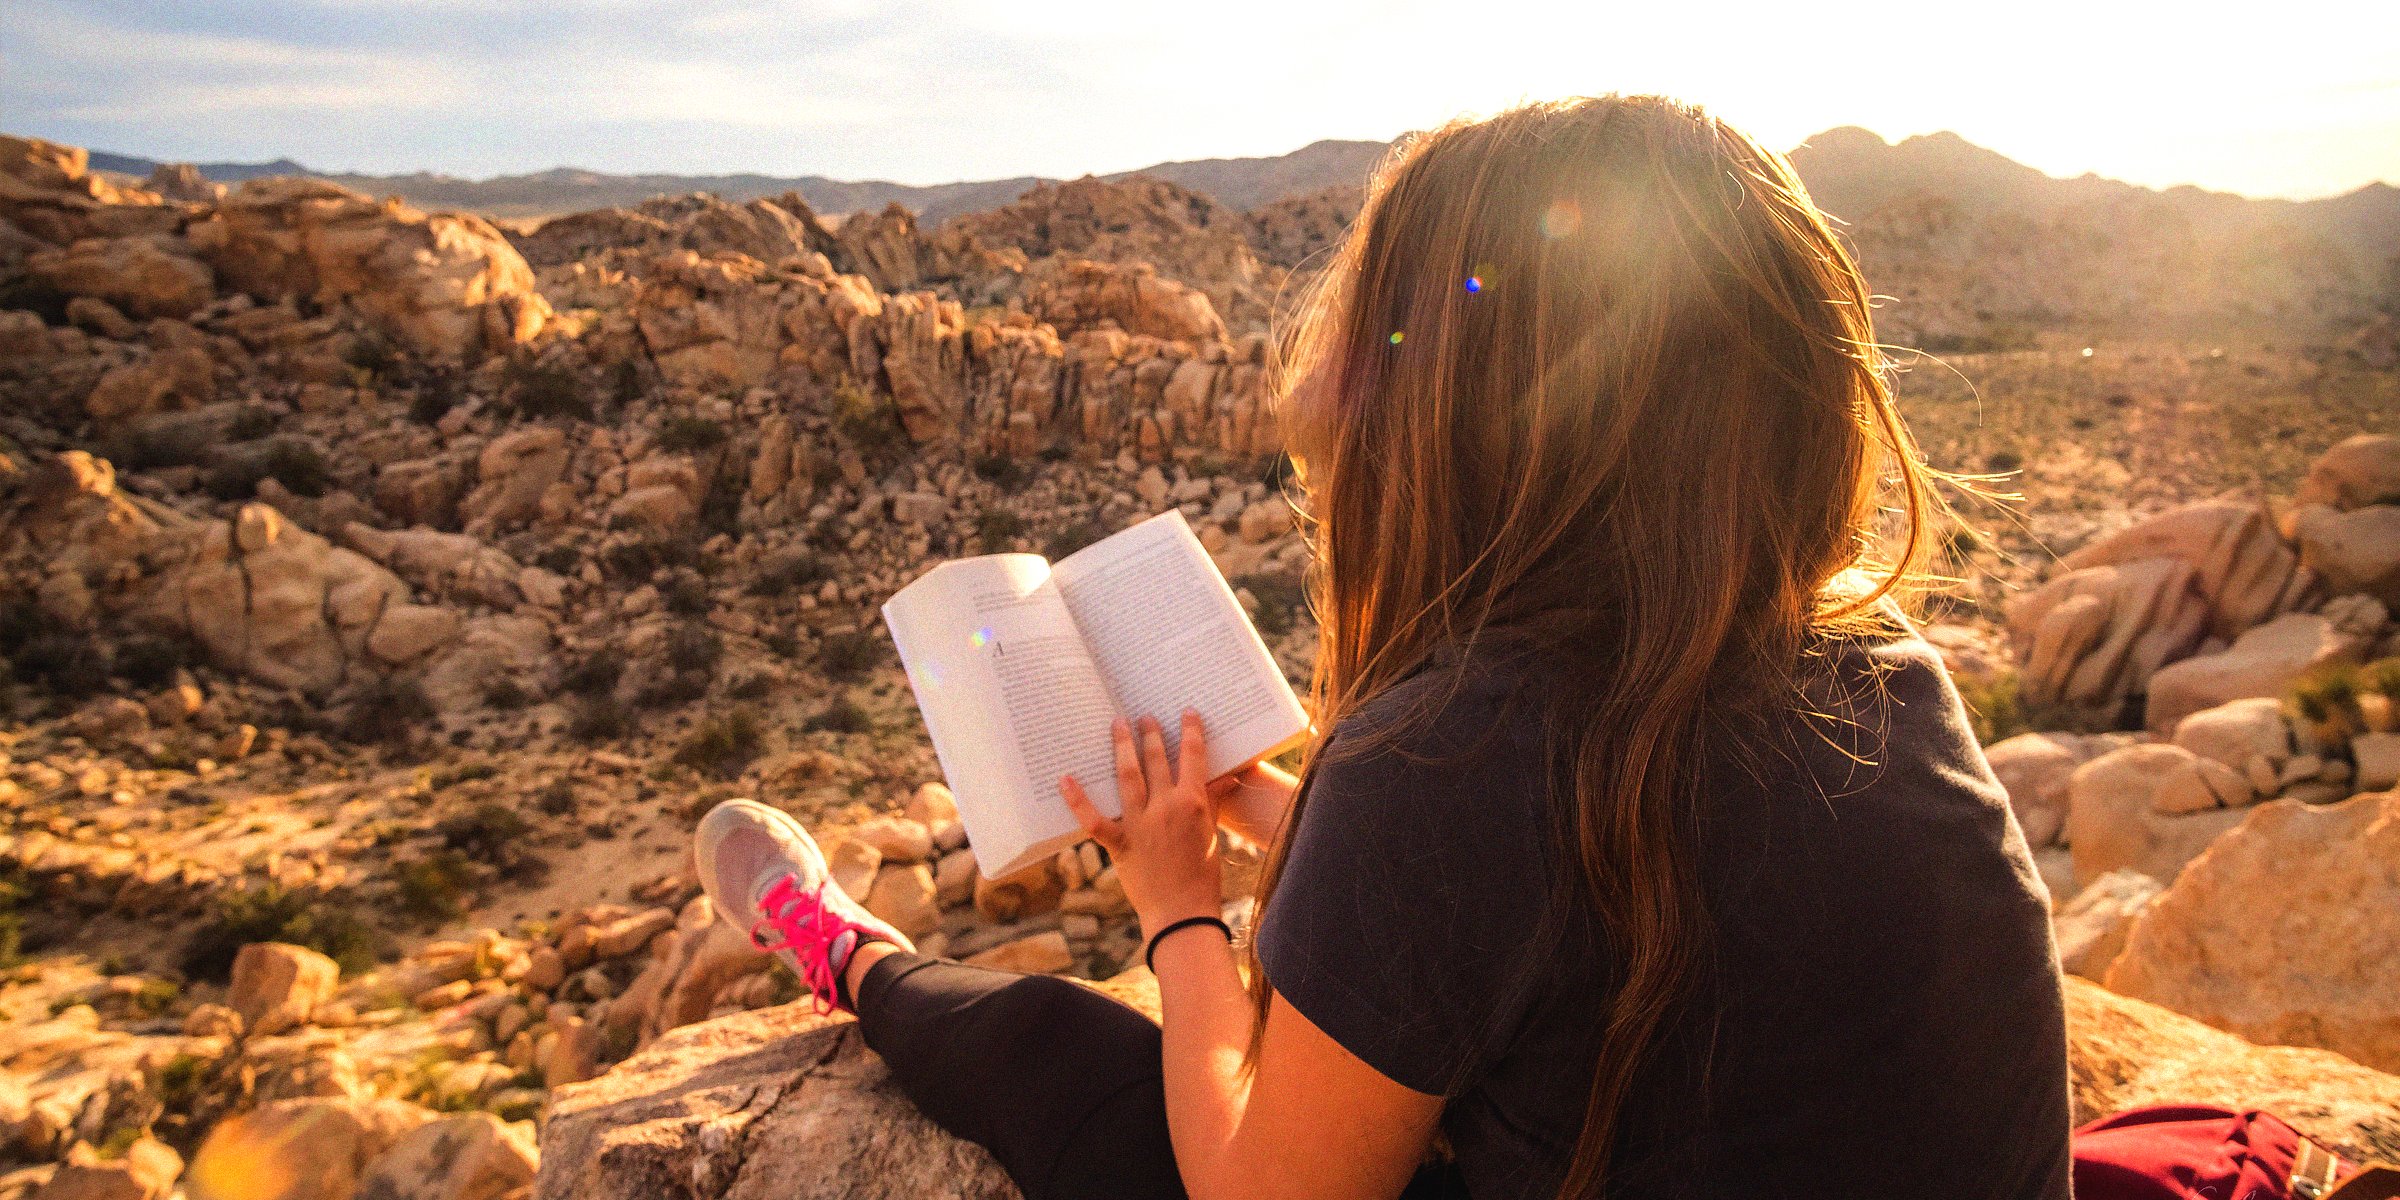 Unsplash | A woman reading a book while in a rocky terrain